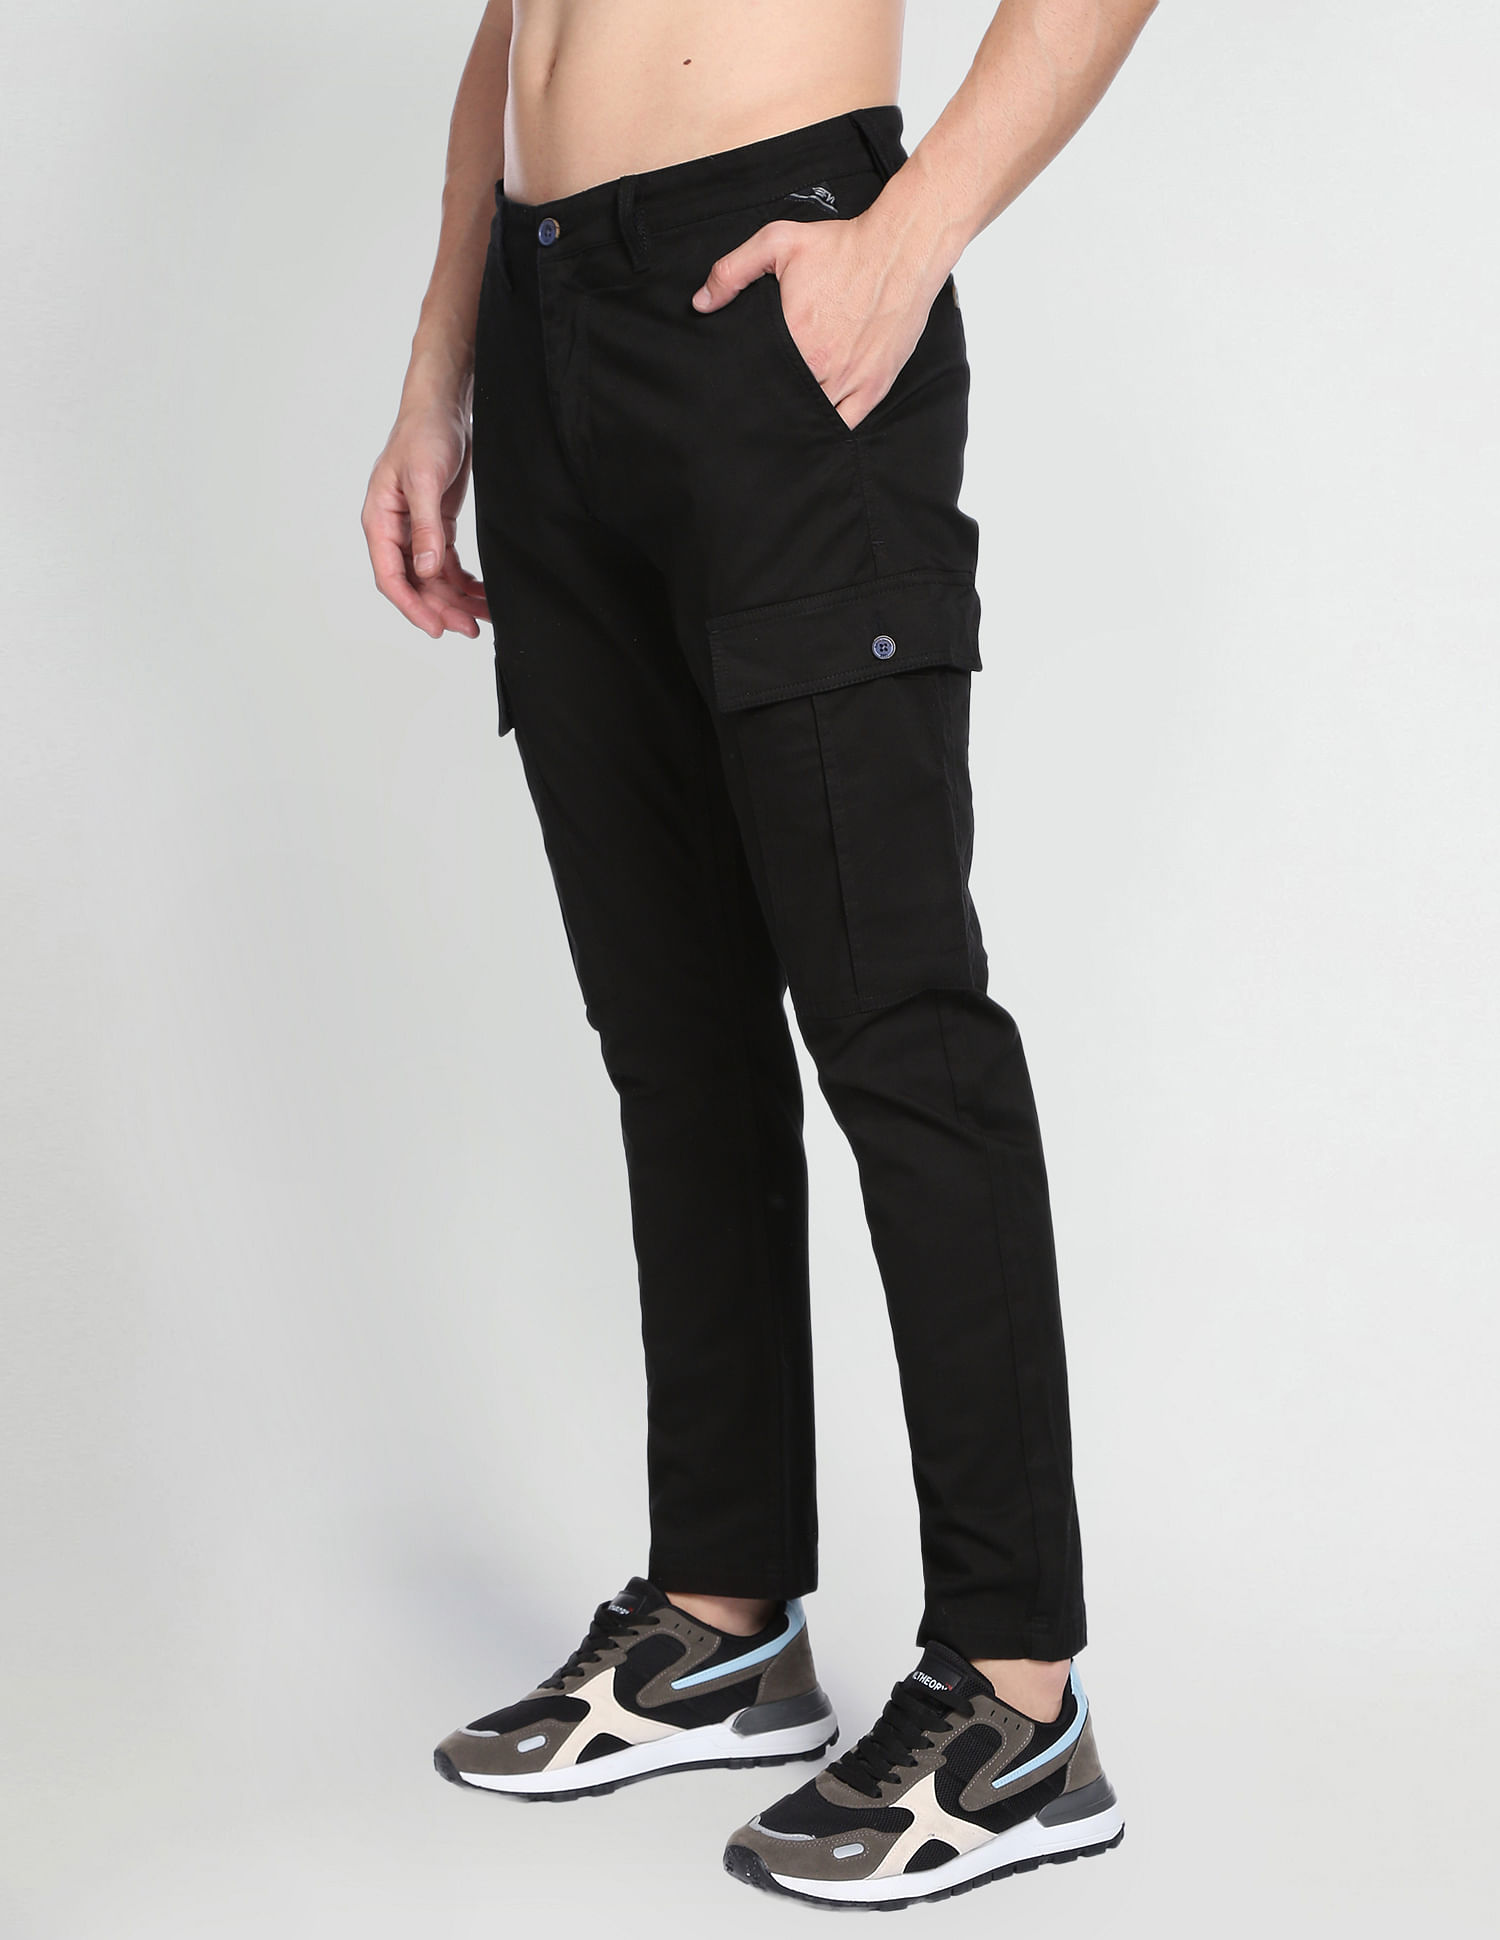 Muscle Fit Cargo Pants  Made with HyperStretch Fabric for Pure Comfort  Olympvs